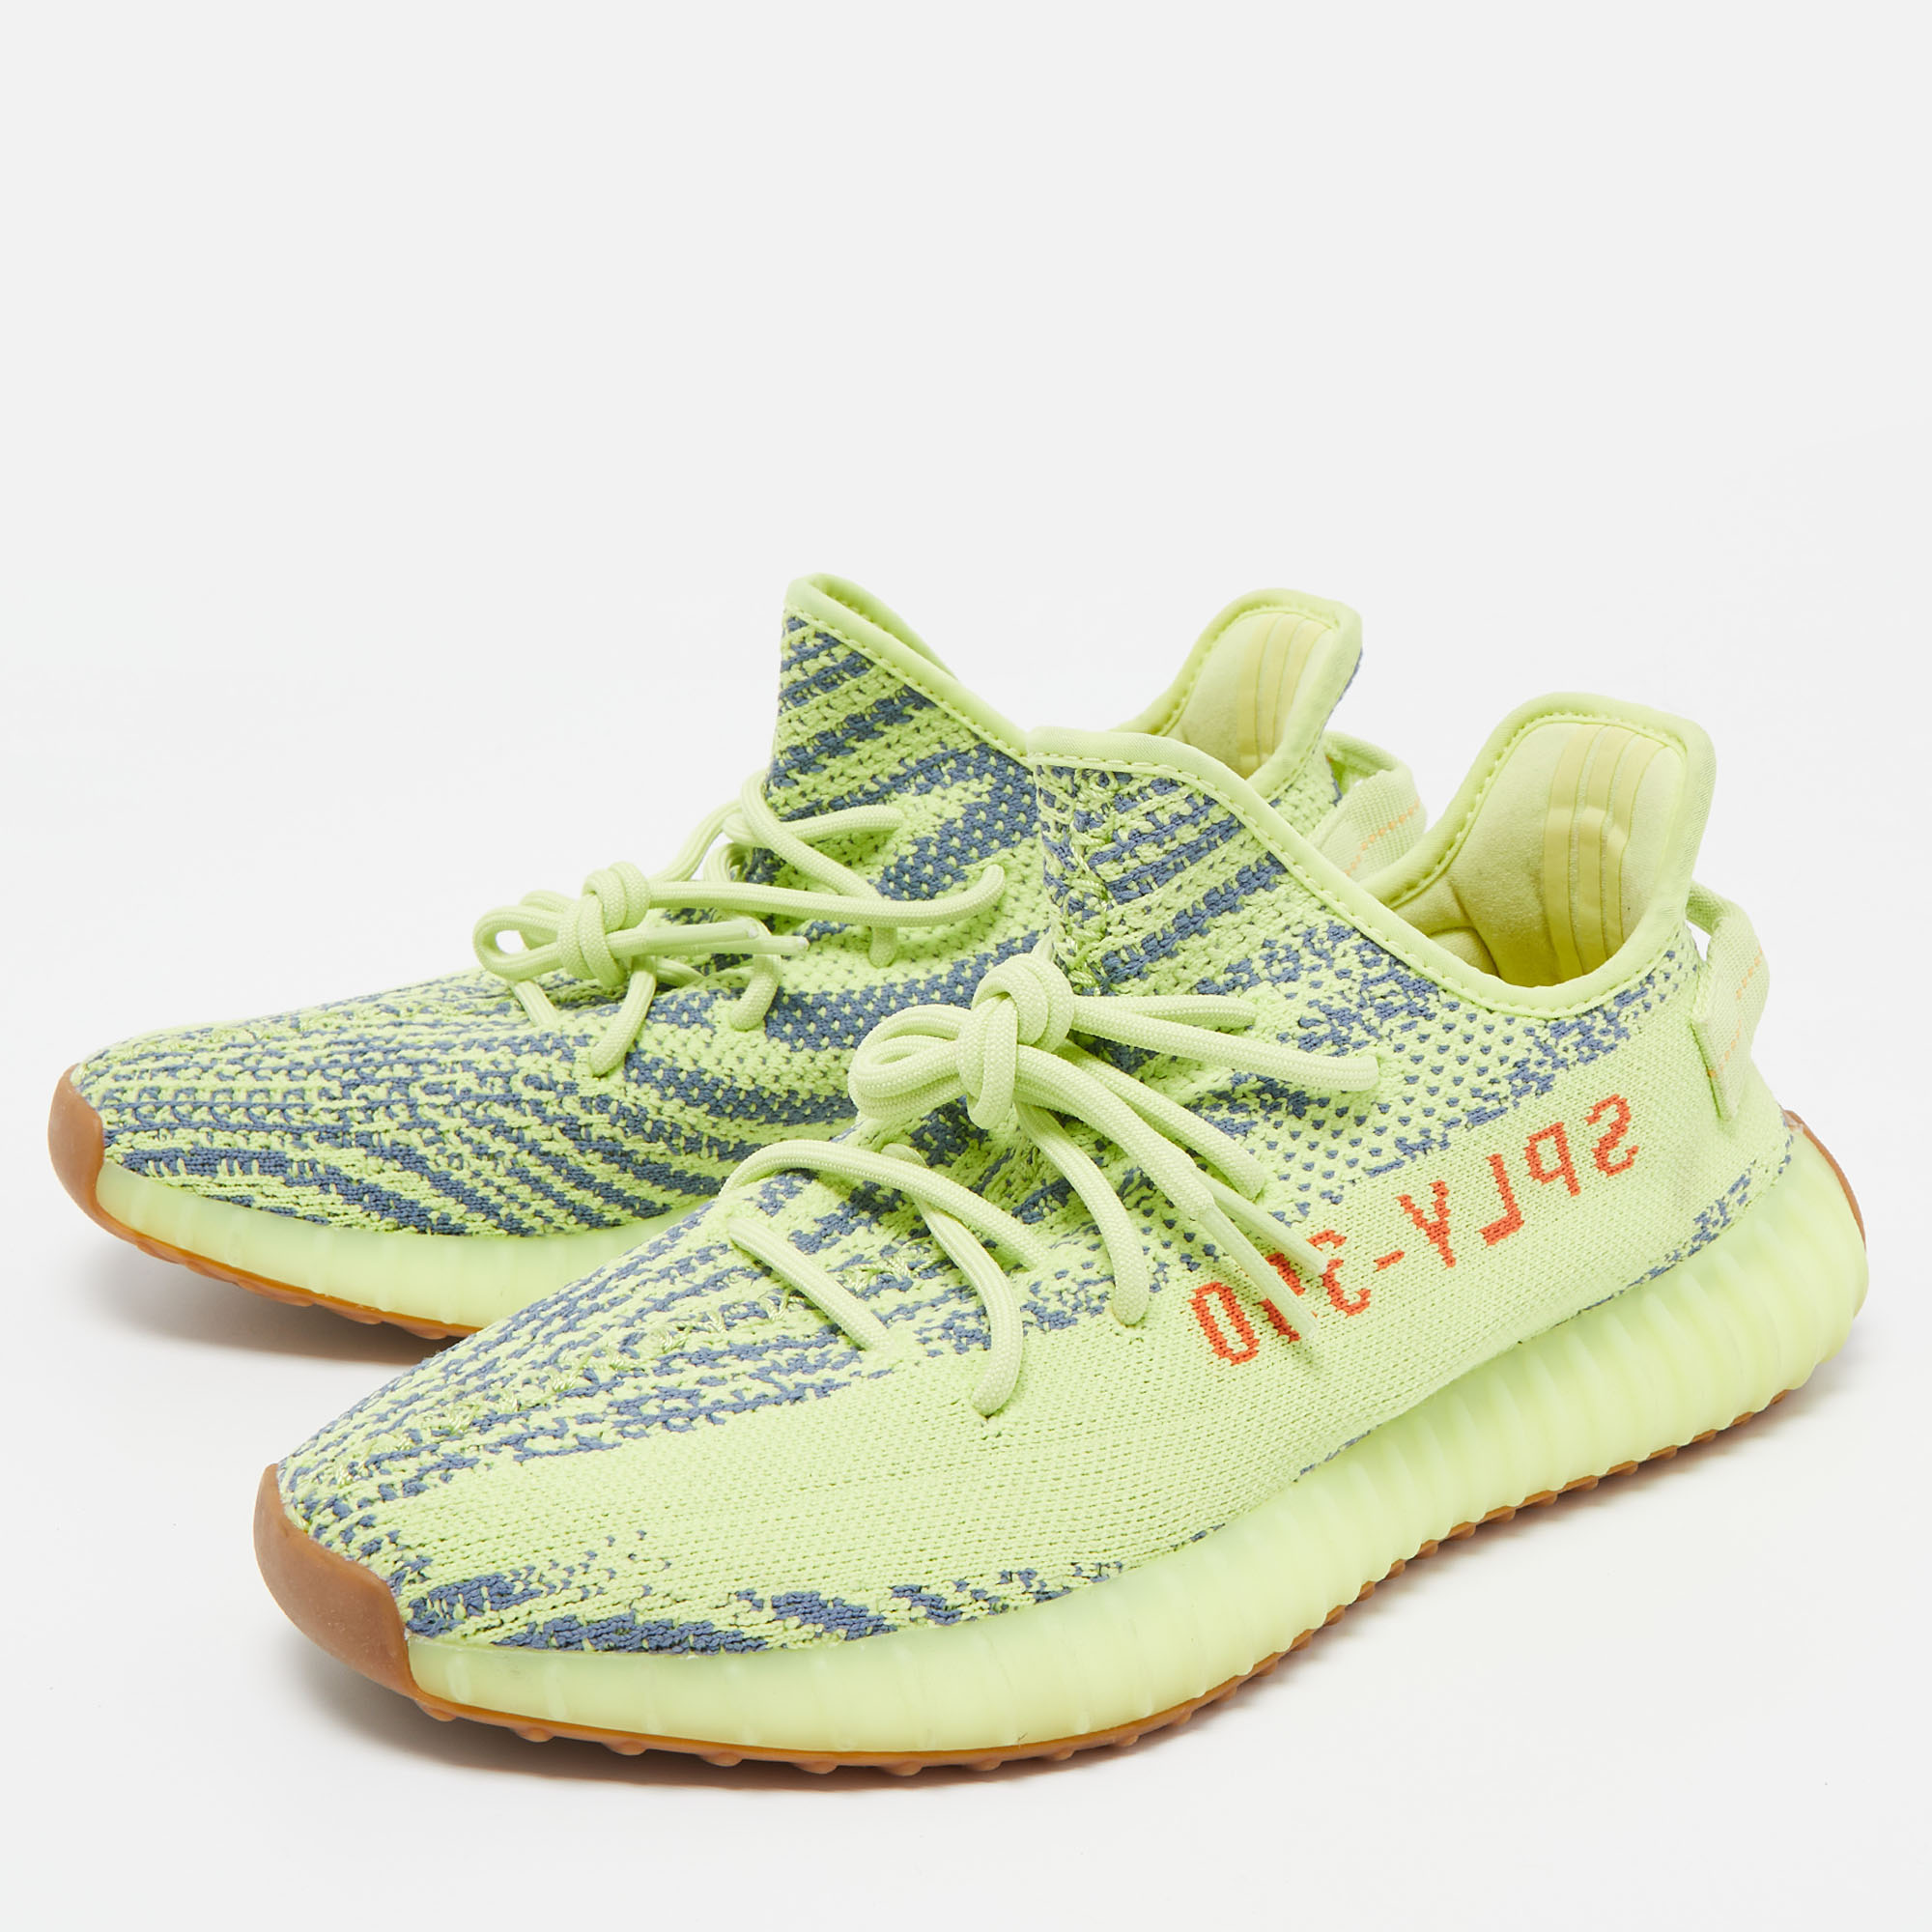 

Yeezy x Adidas Neon Yellow/Blue Knit Fabric Boost 350 V2 Semi Frozen Yellow Sneakers Size